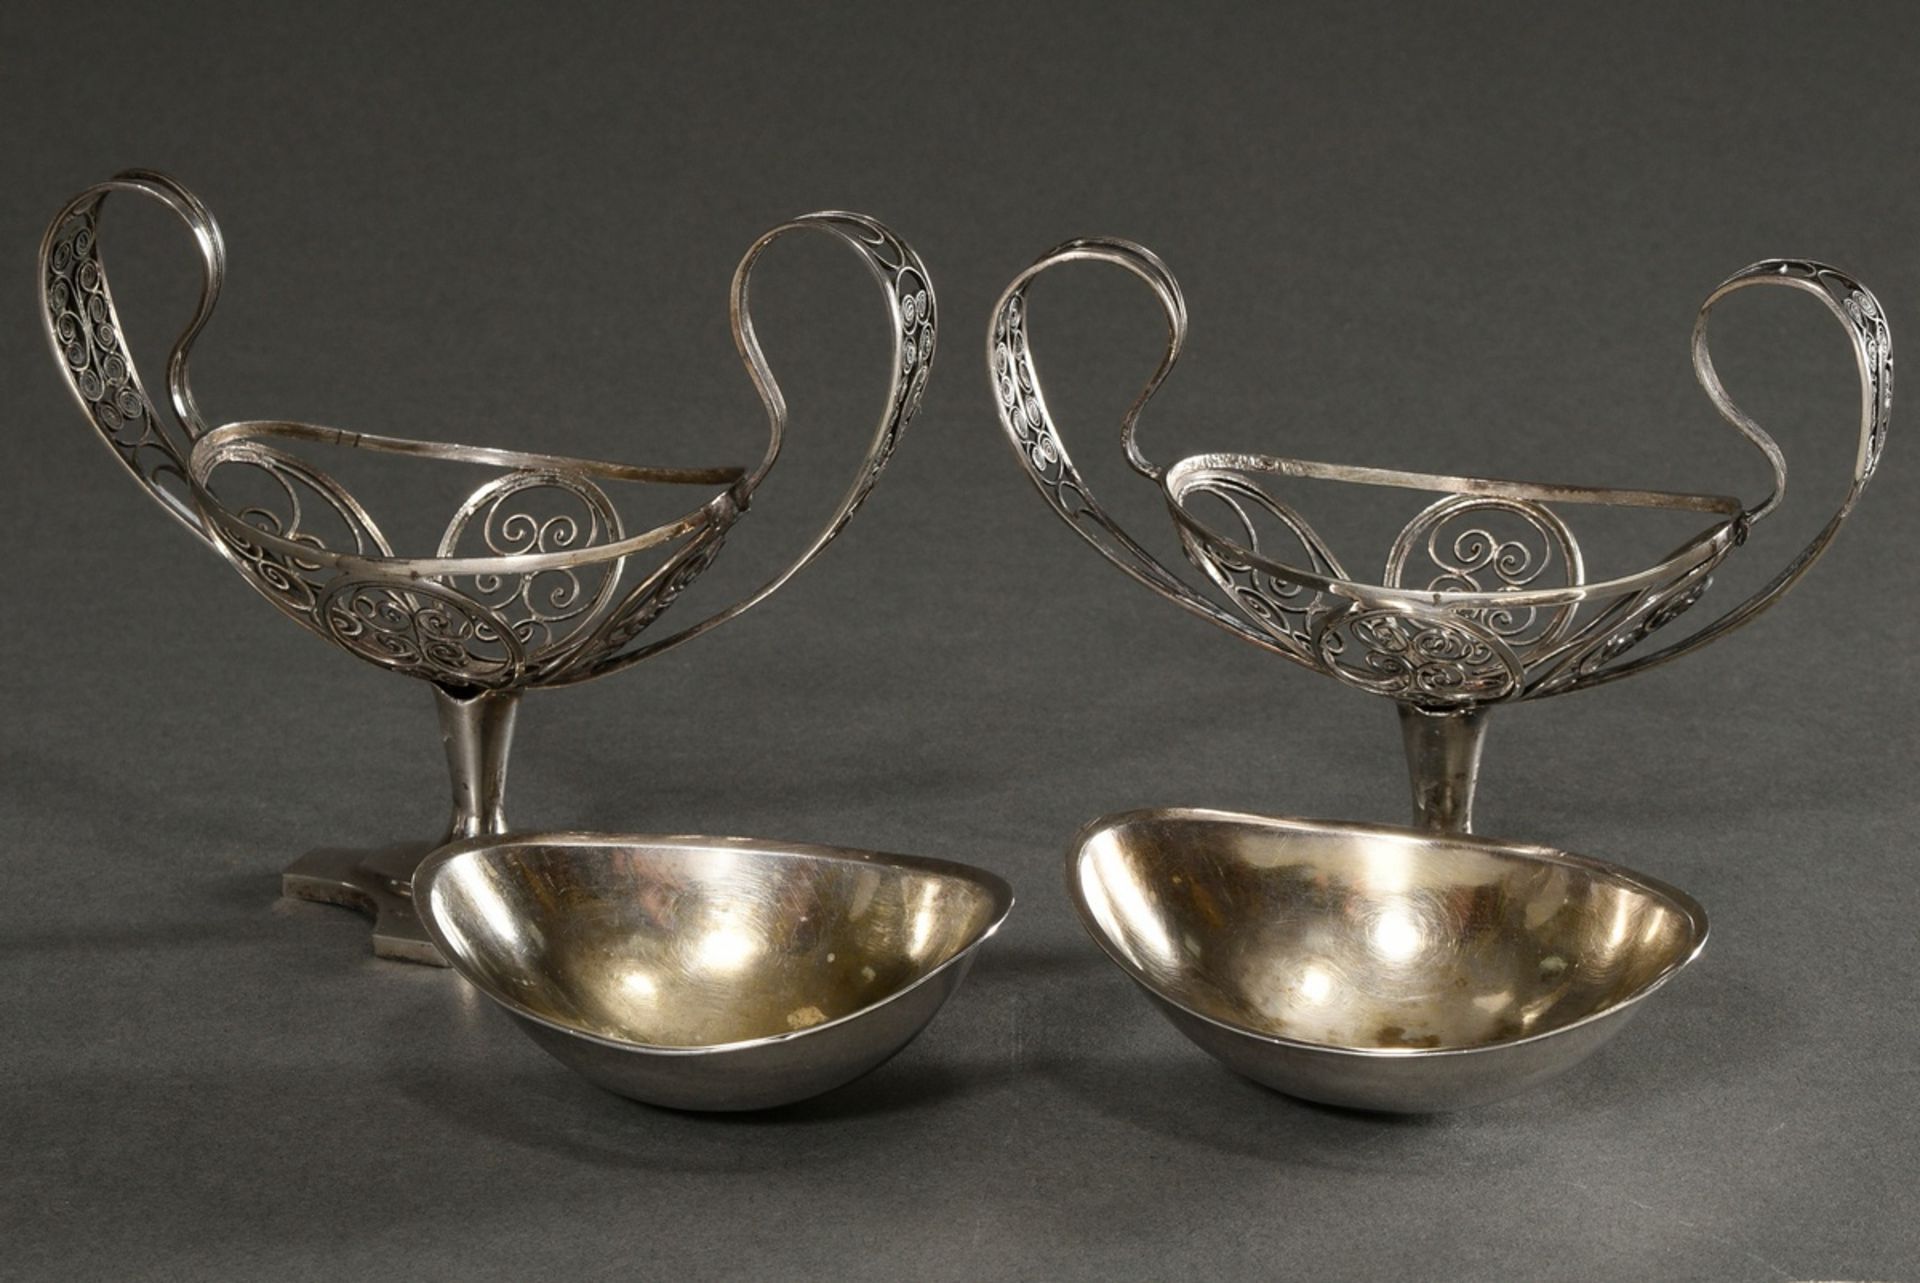 A pair of Empire salvers with filigree bowl and ear handles over a quatrefoil foot, removable inser - Image 4 of 6